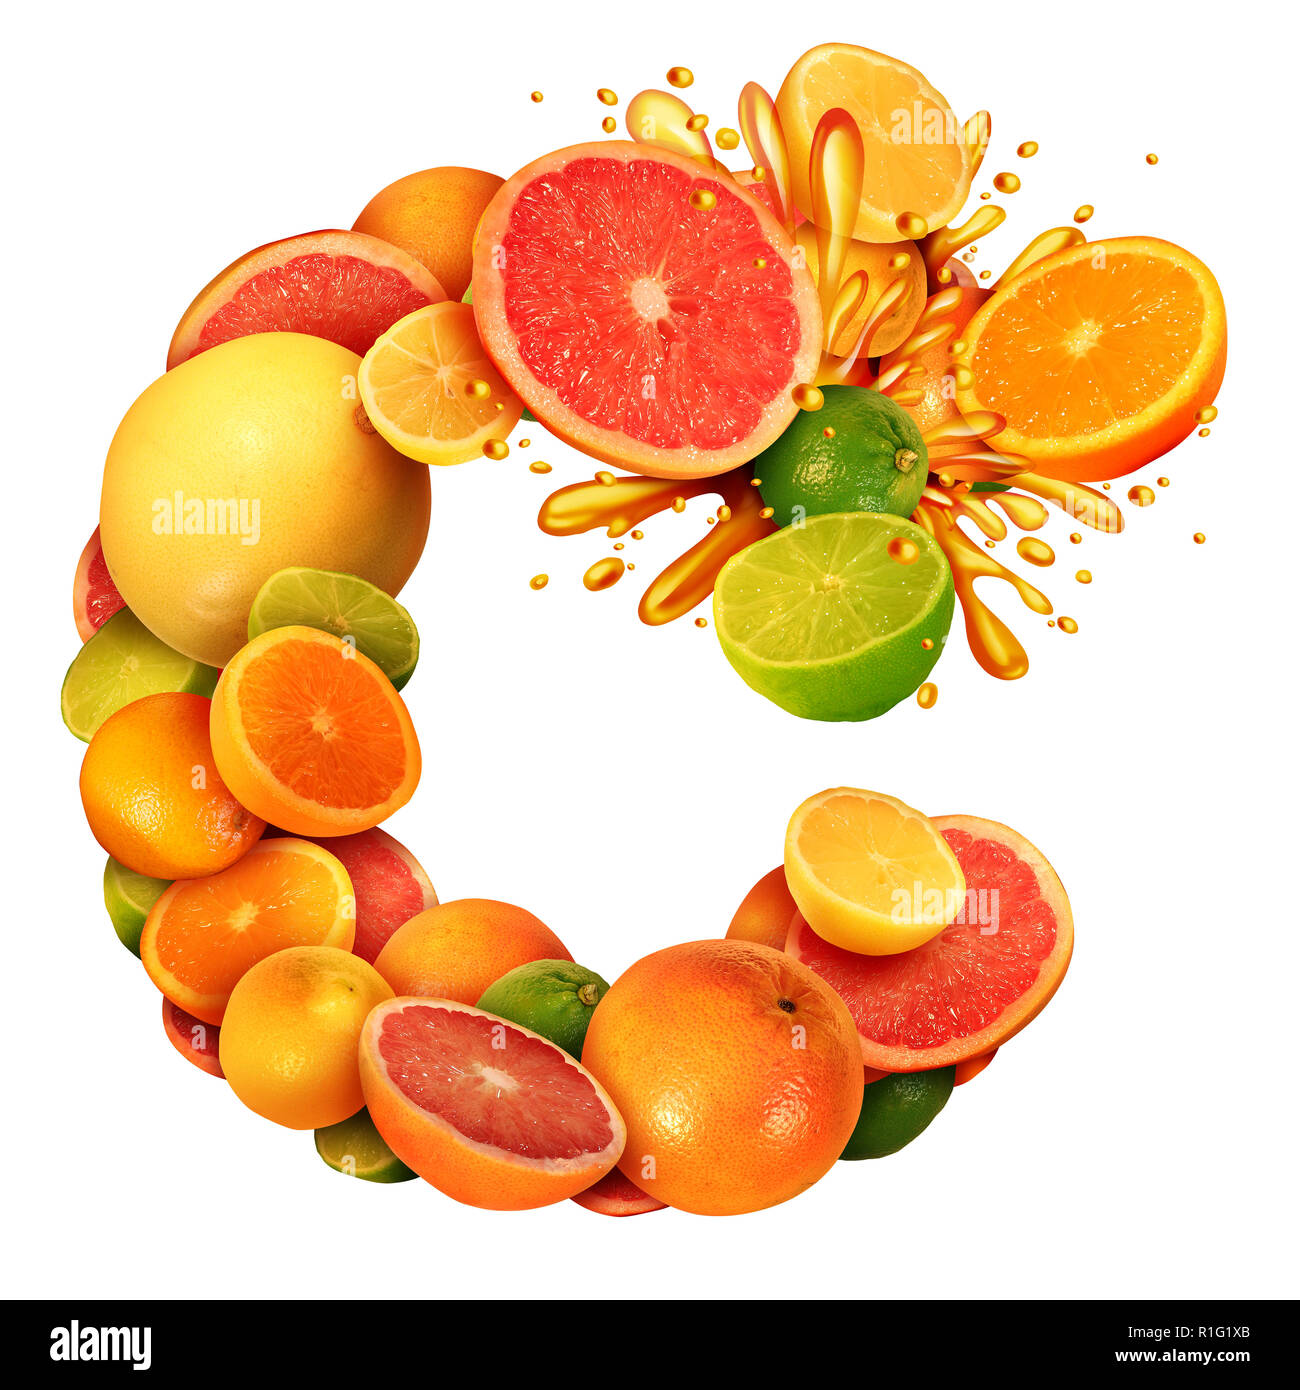 Vitamin C as citrus text concept as a group of fruit with oranges lemons lime tangerines and grapefruit as a symbol of healthy eating. Stock Photo